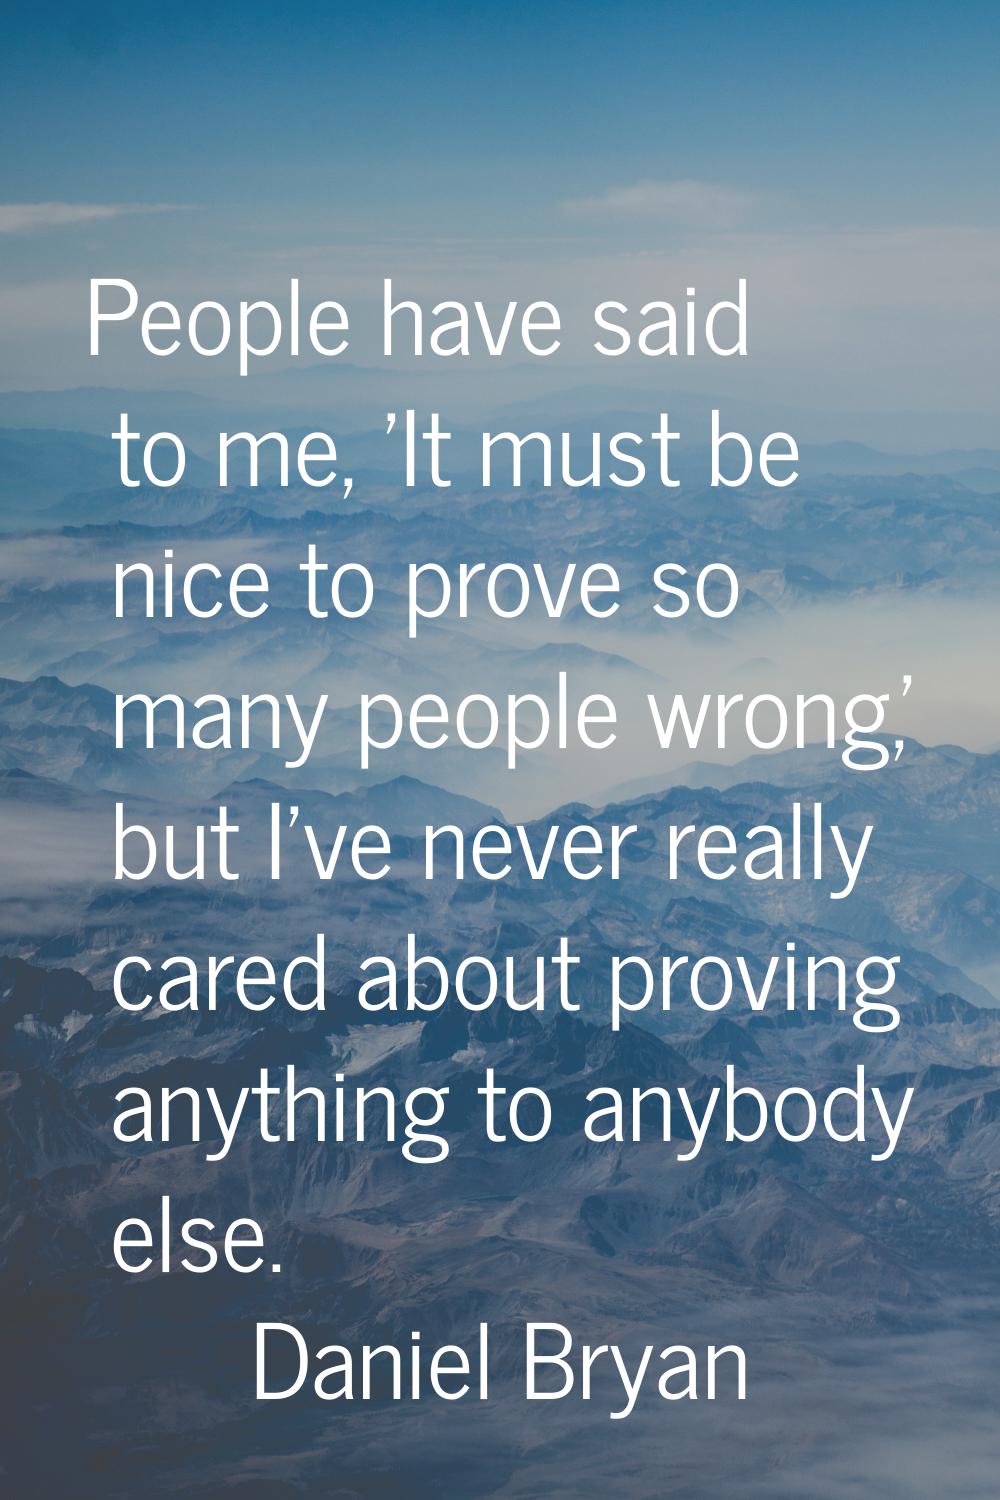 People have said to me, 'It must be nice to prove so many people wrong,' but I've never really care